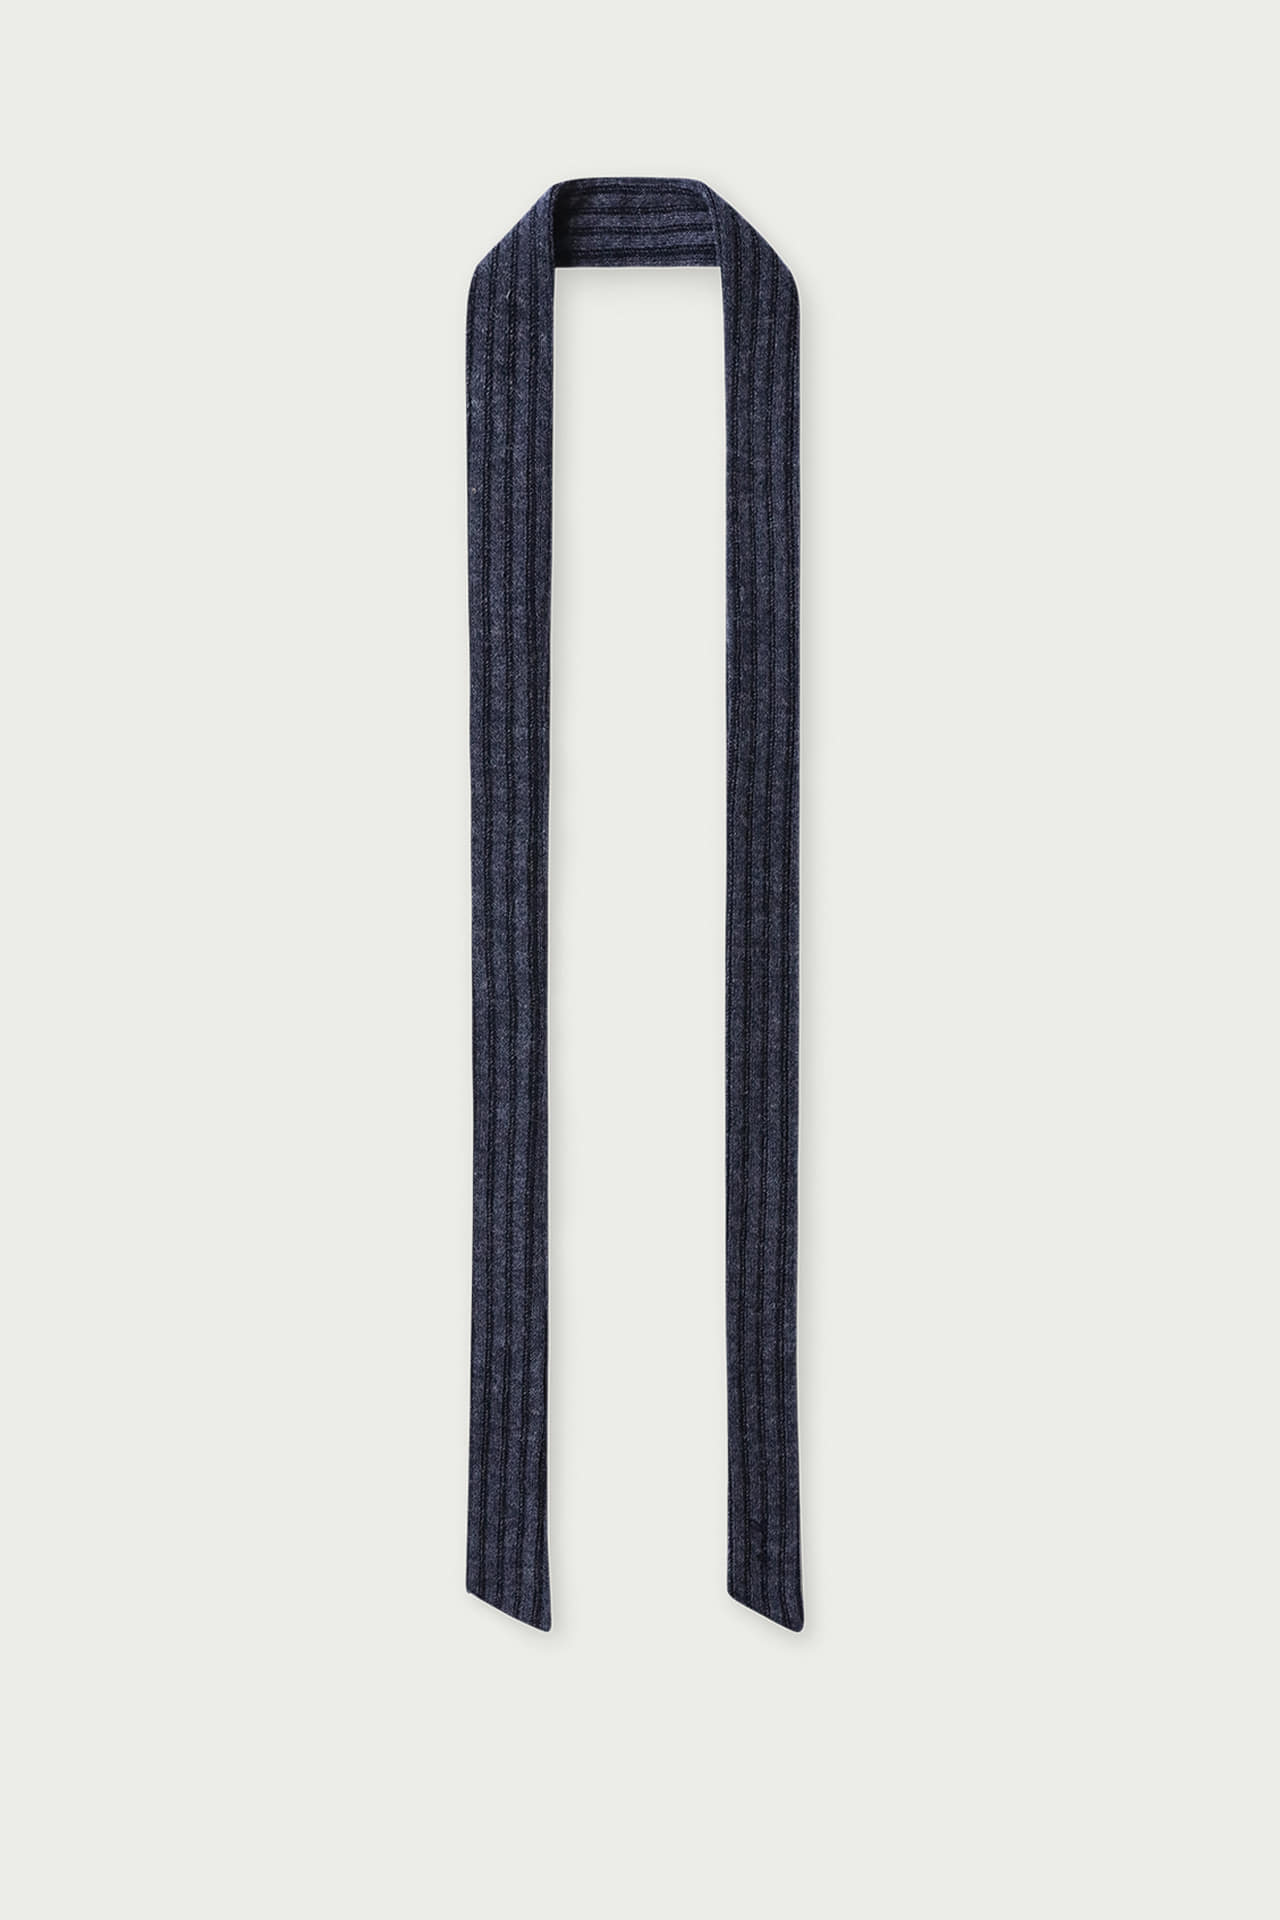 RIBBED EMBROIDERED KNIT MUFFLER - NAVY